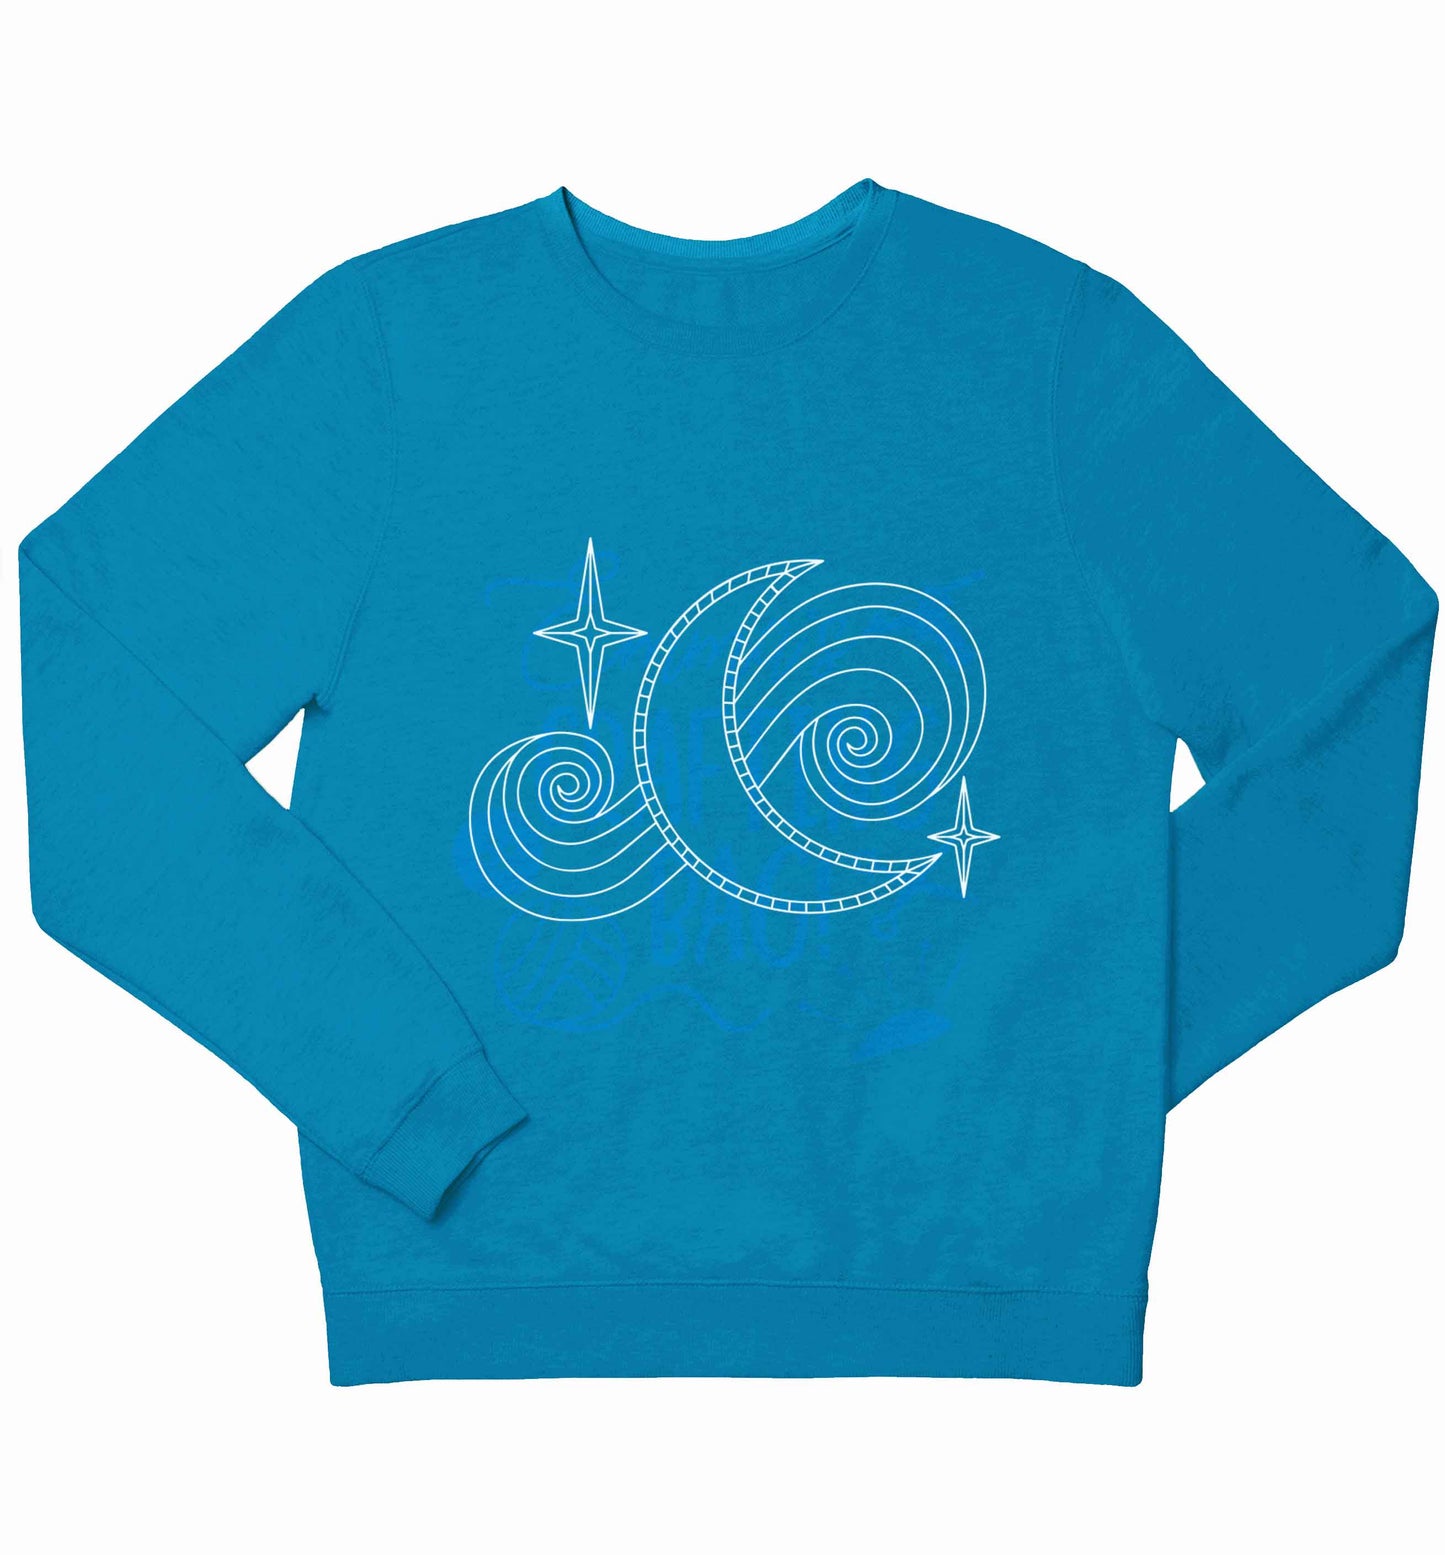 Moon and stars illustration children's blue sweater 12-13 Years